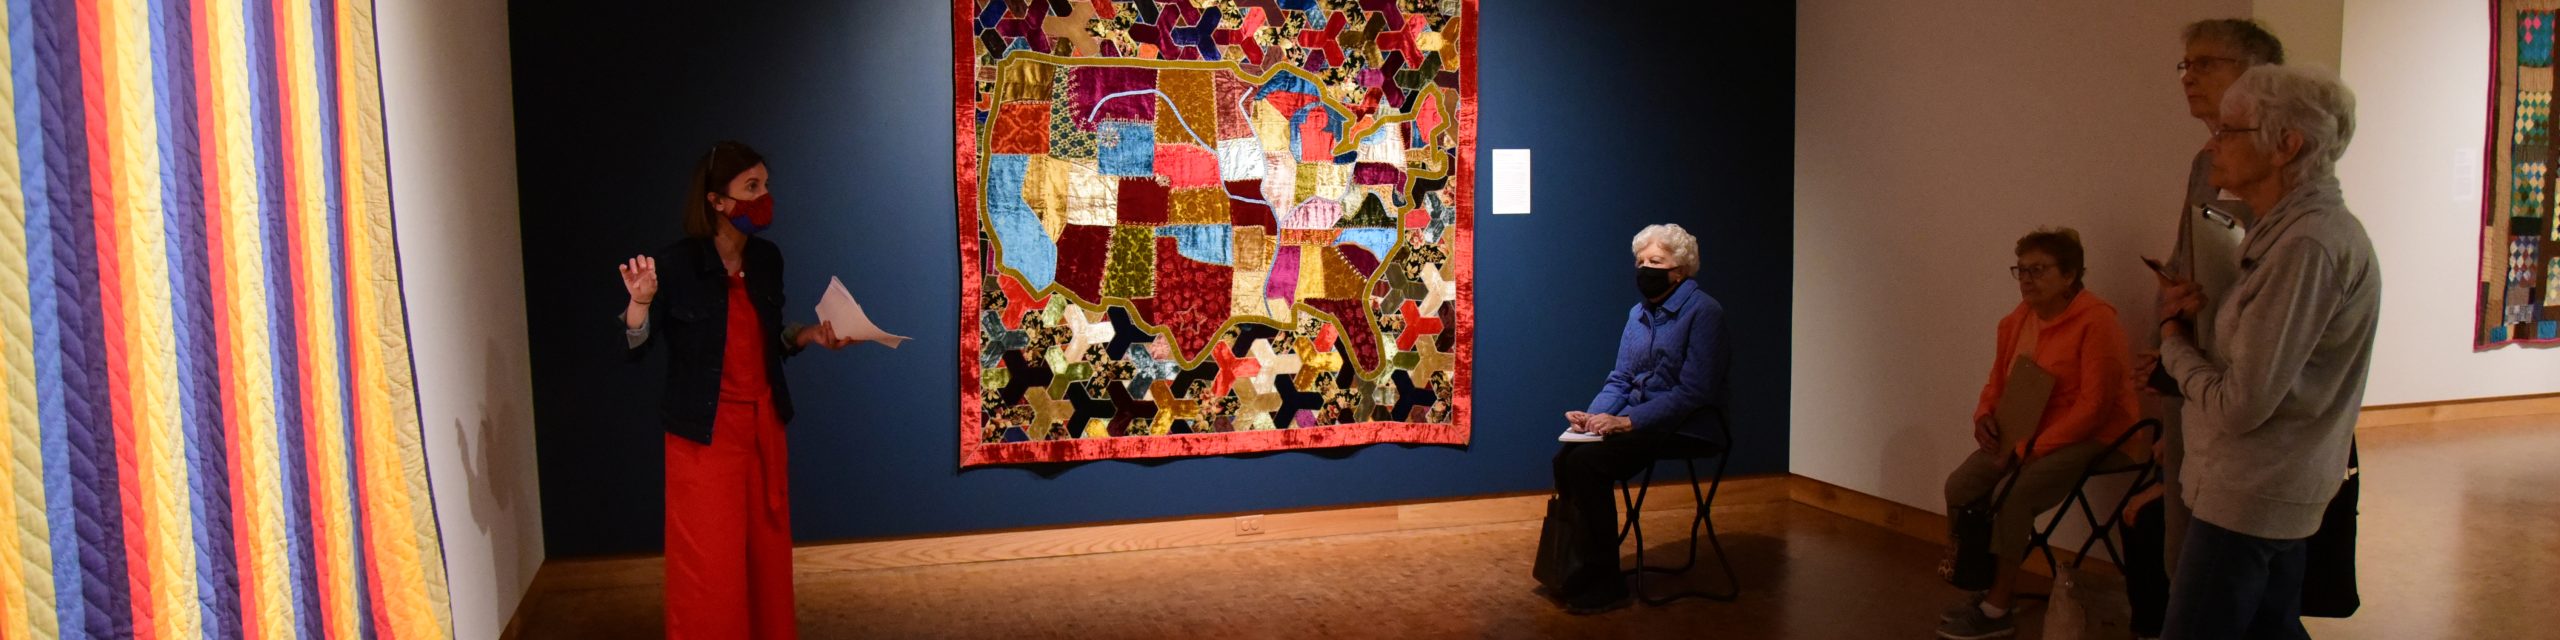 curator standing in front of quilts while 4 onlookers enjoy the explanation